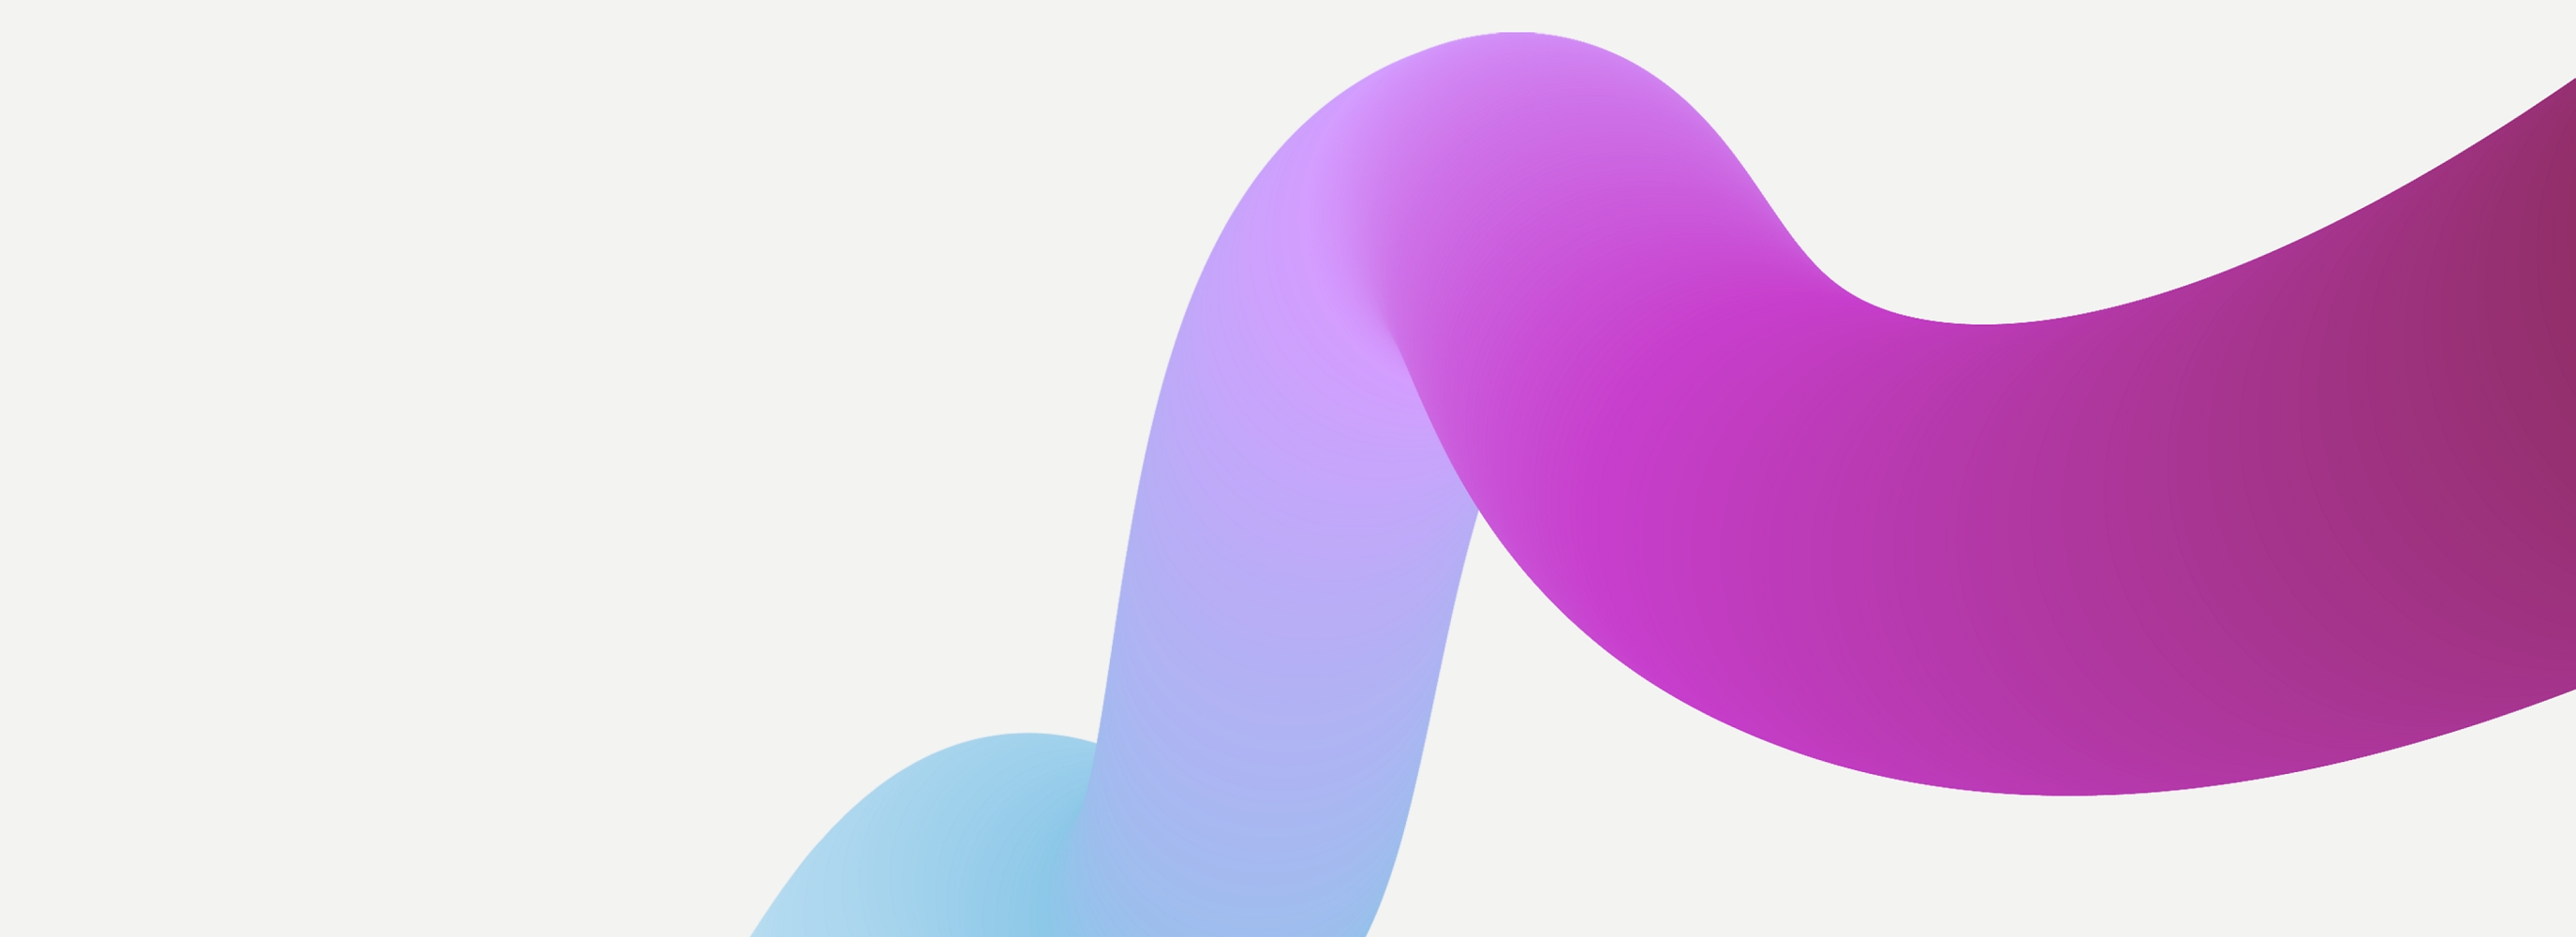 Abstract graphic of a flowing ribbon with a gradient from blue to purple on a white background.